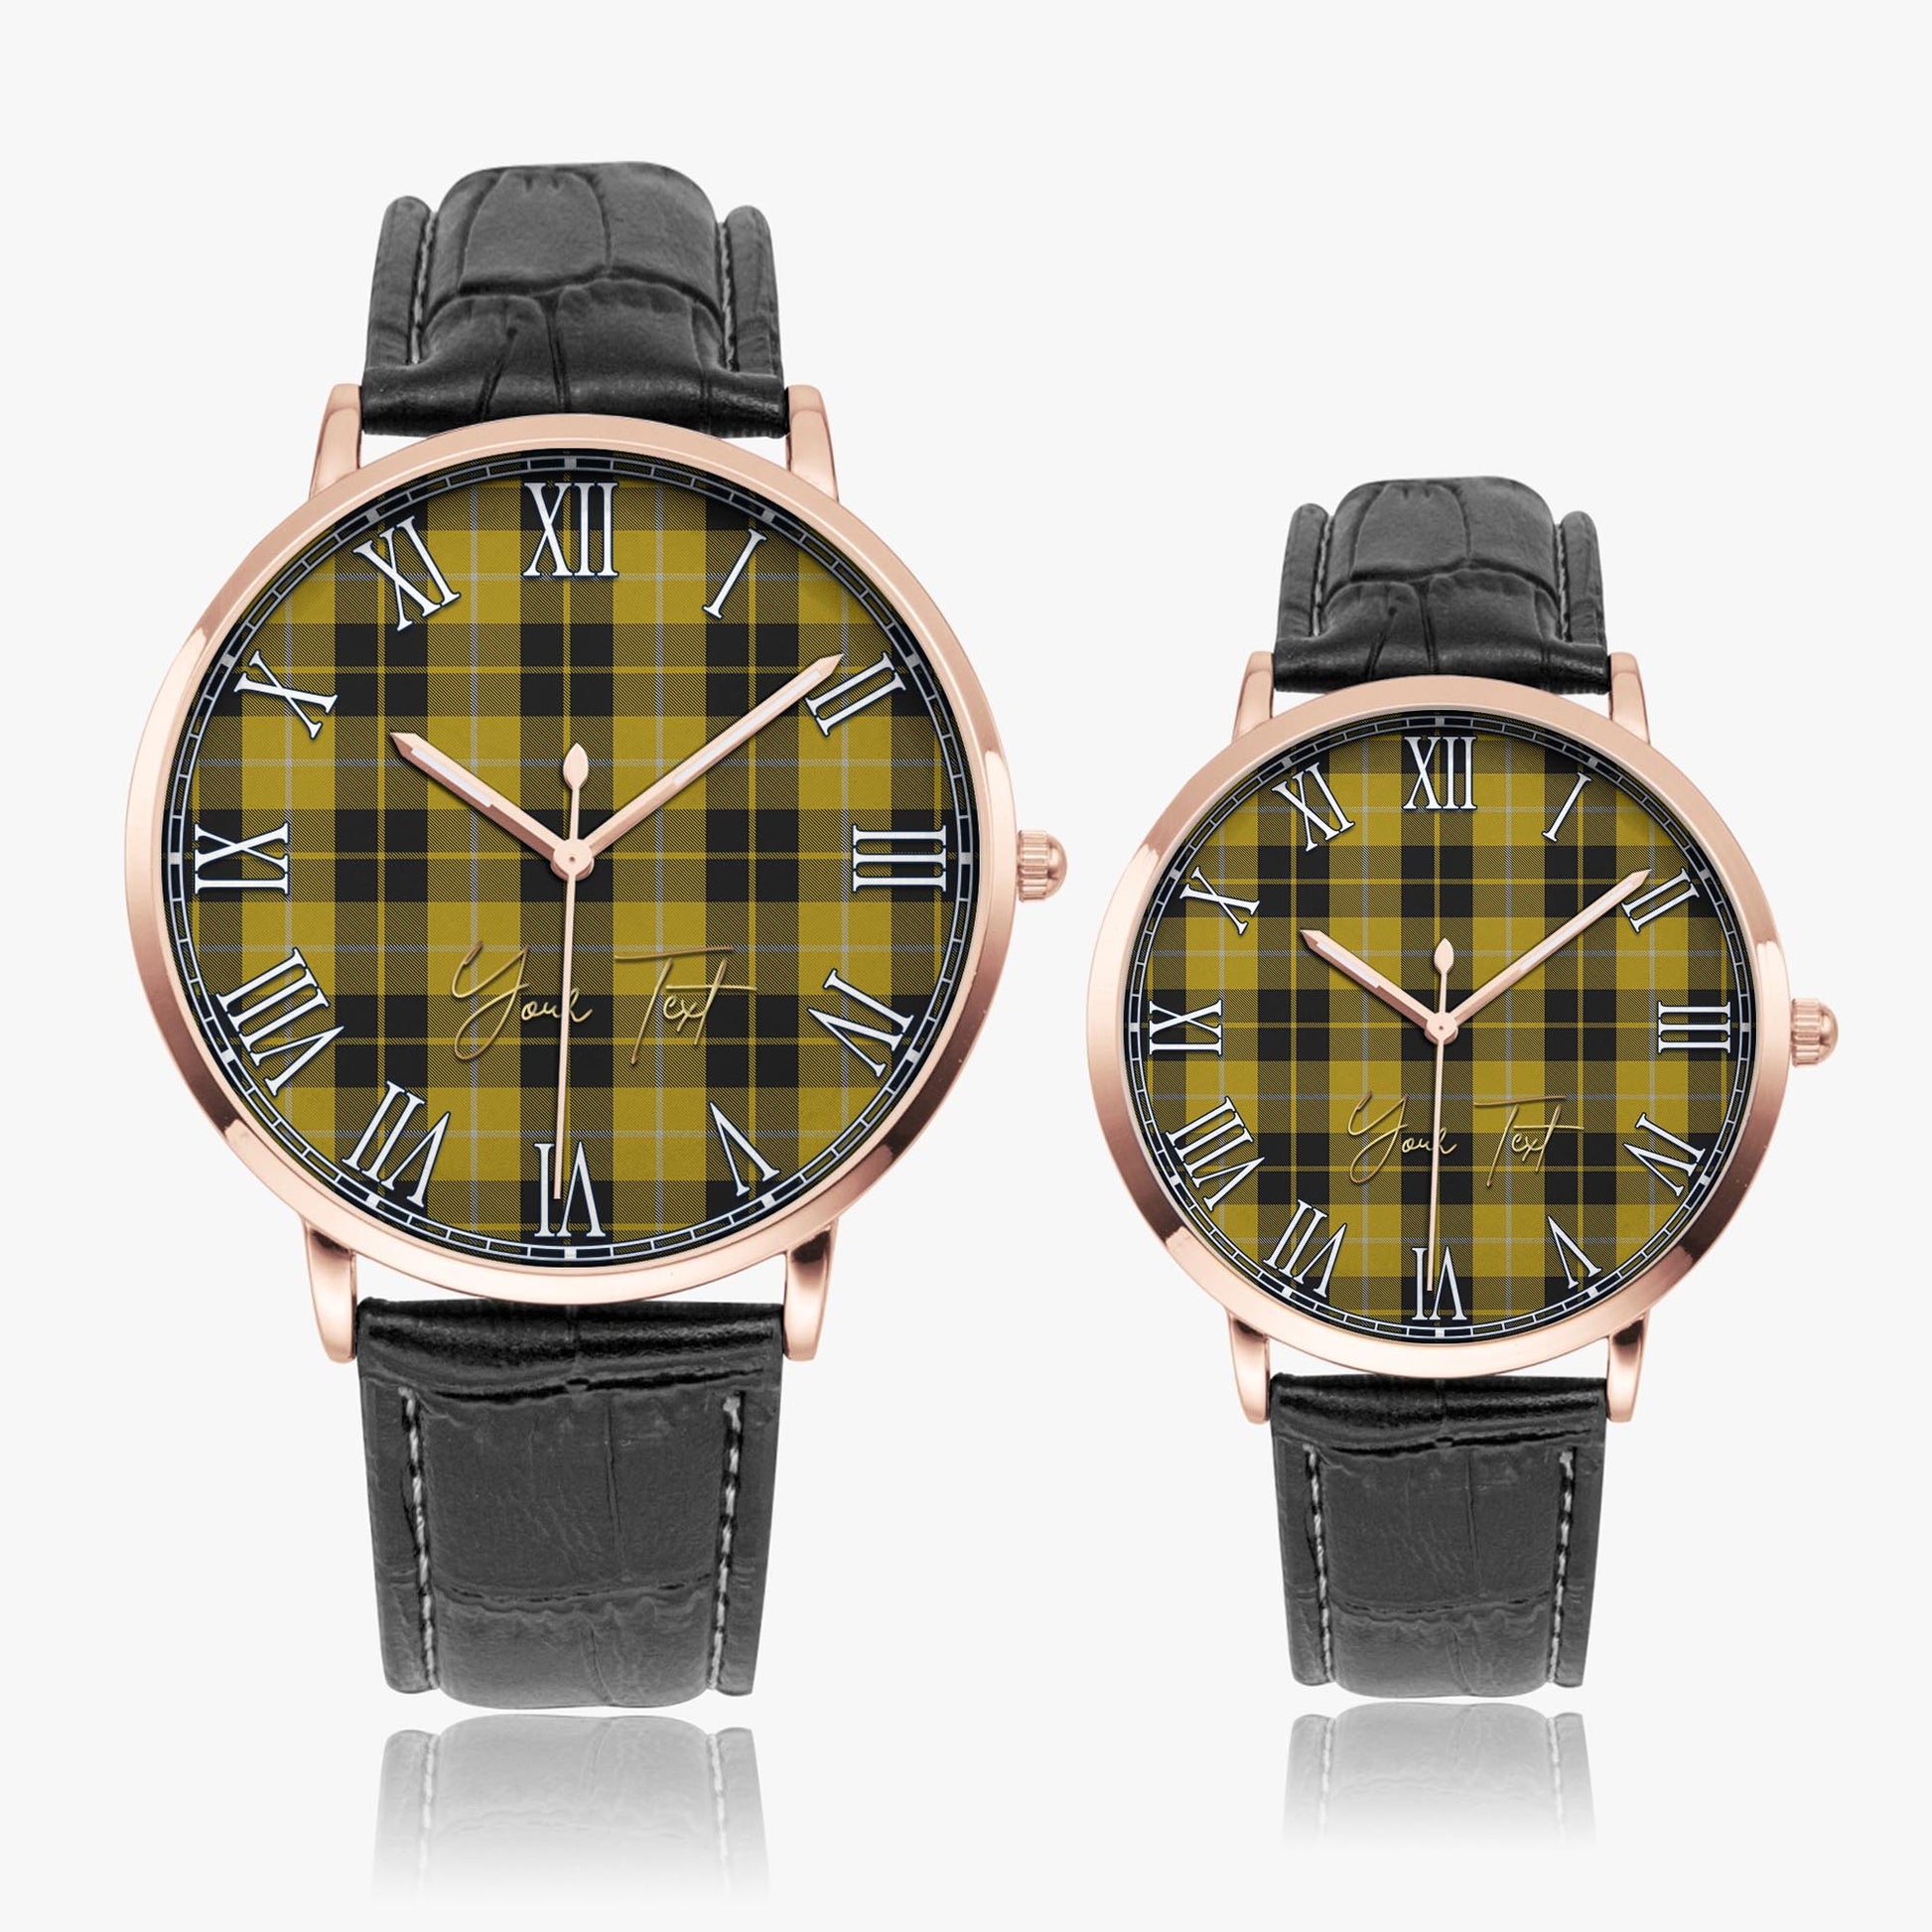 Barclay Dress Tartan Personalized Your Text Leather Trap Quartz Watch Ultra Thin Rose Gold Case With Black Leather Strap - Tartanvibesclothing